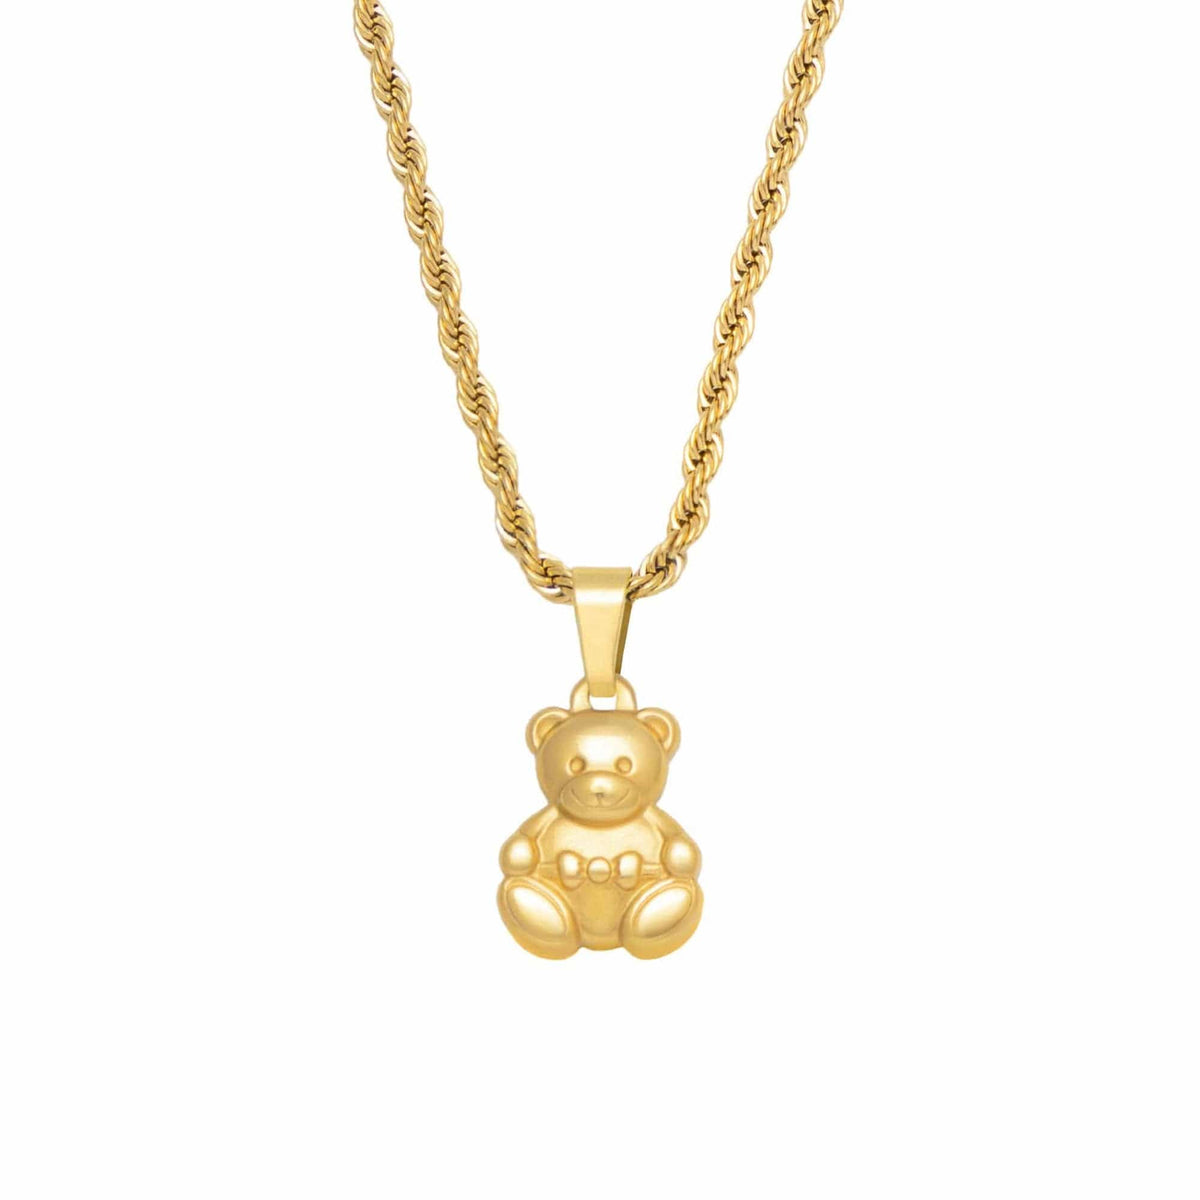 BohoMoon Stainless Steel Mini Teddy Necklace Gold